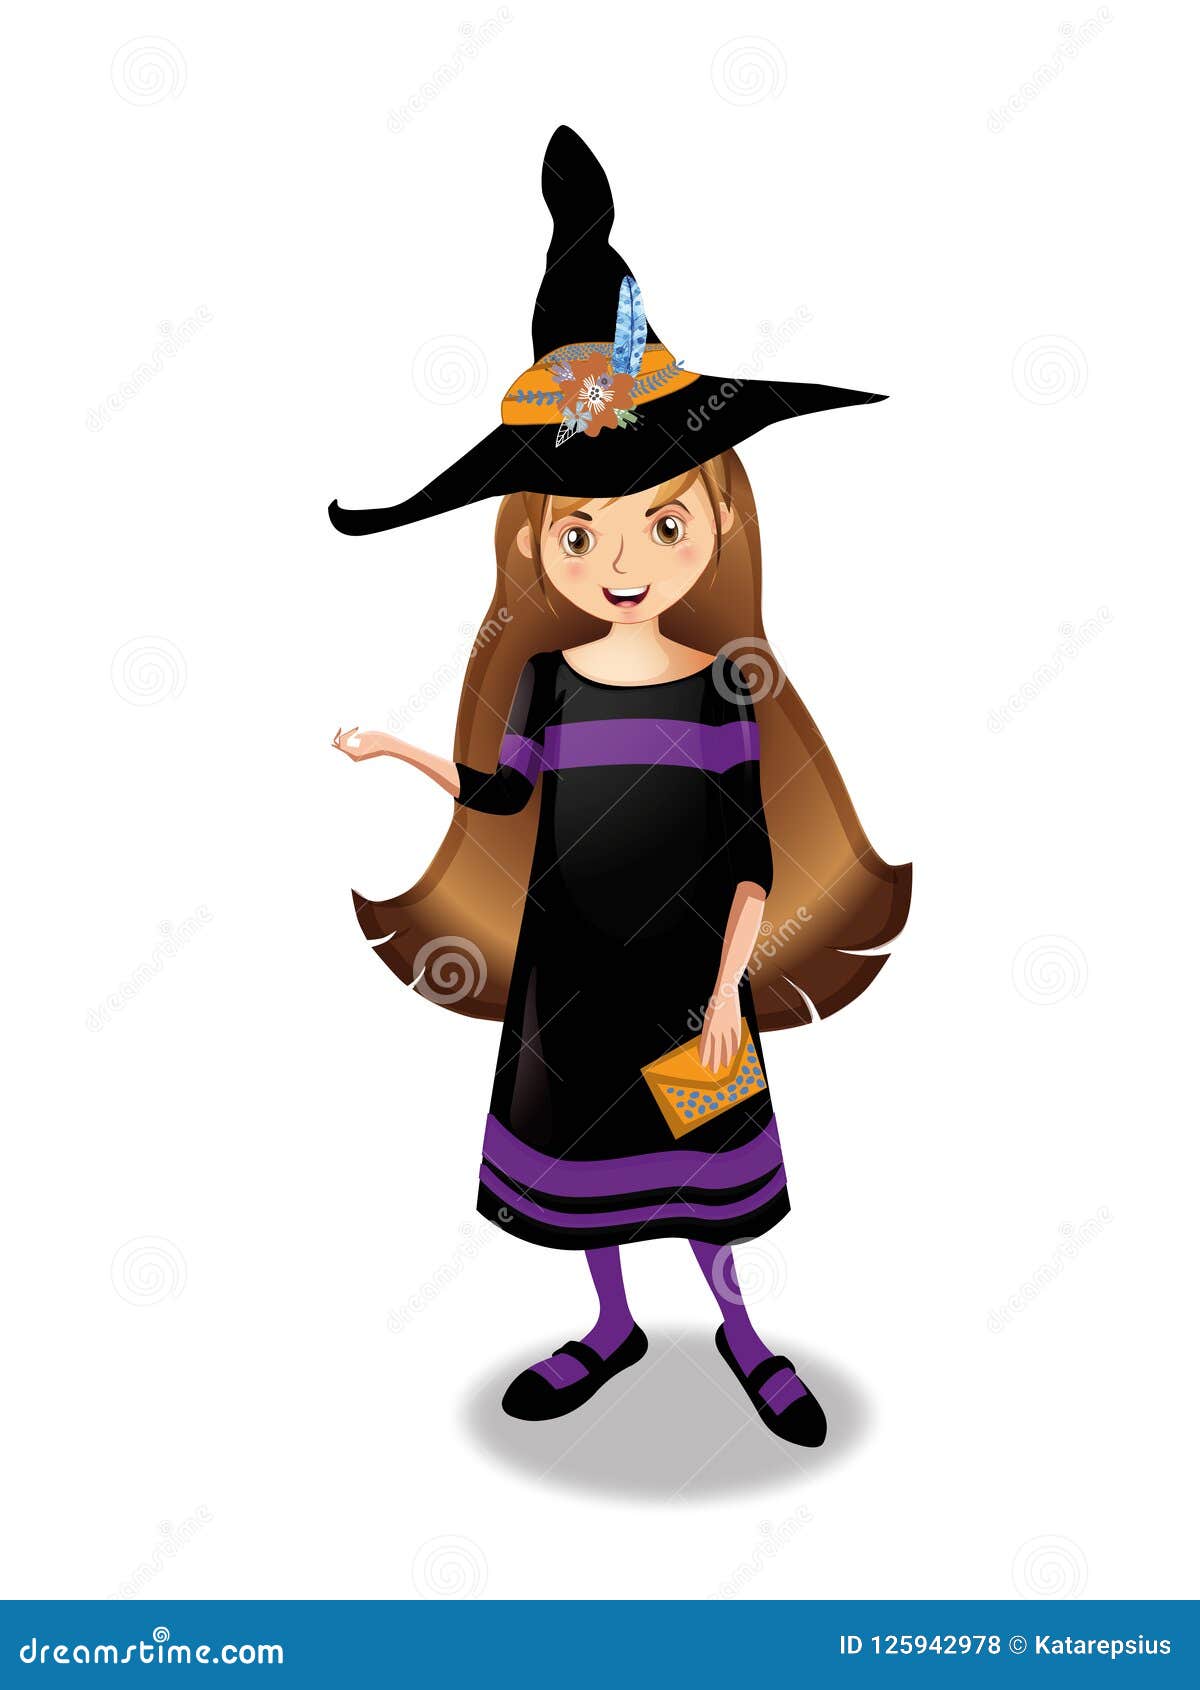 Halloween Vector Illustration of Young Witch Girl with Brown Hair on ...